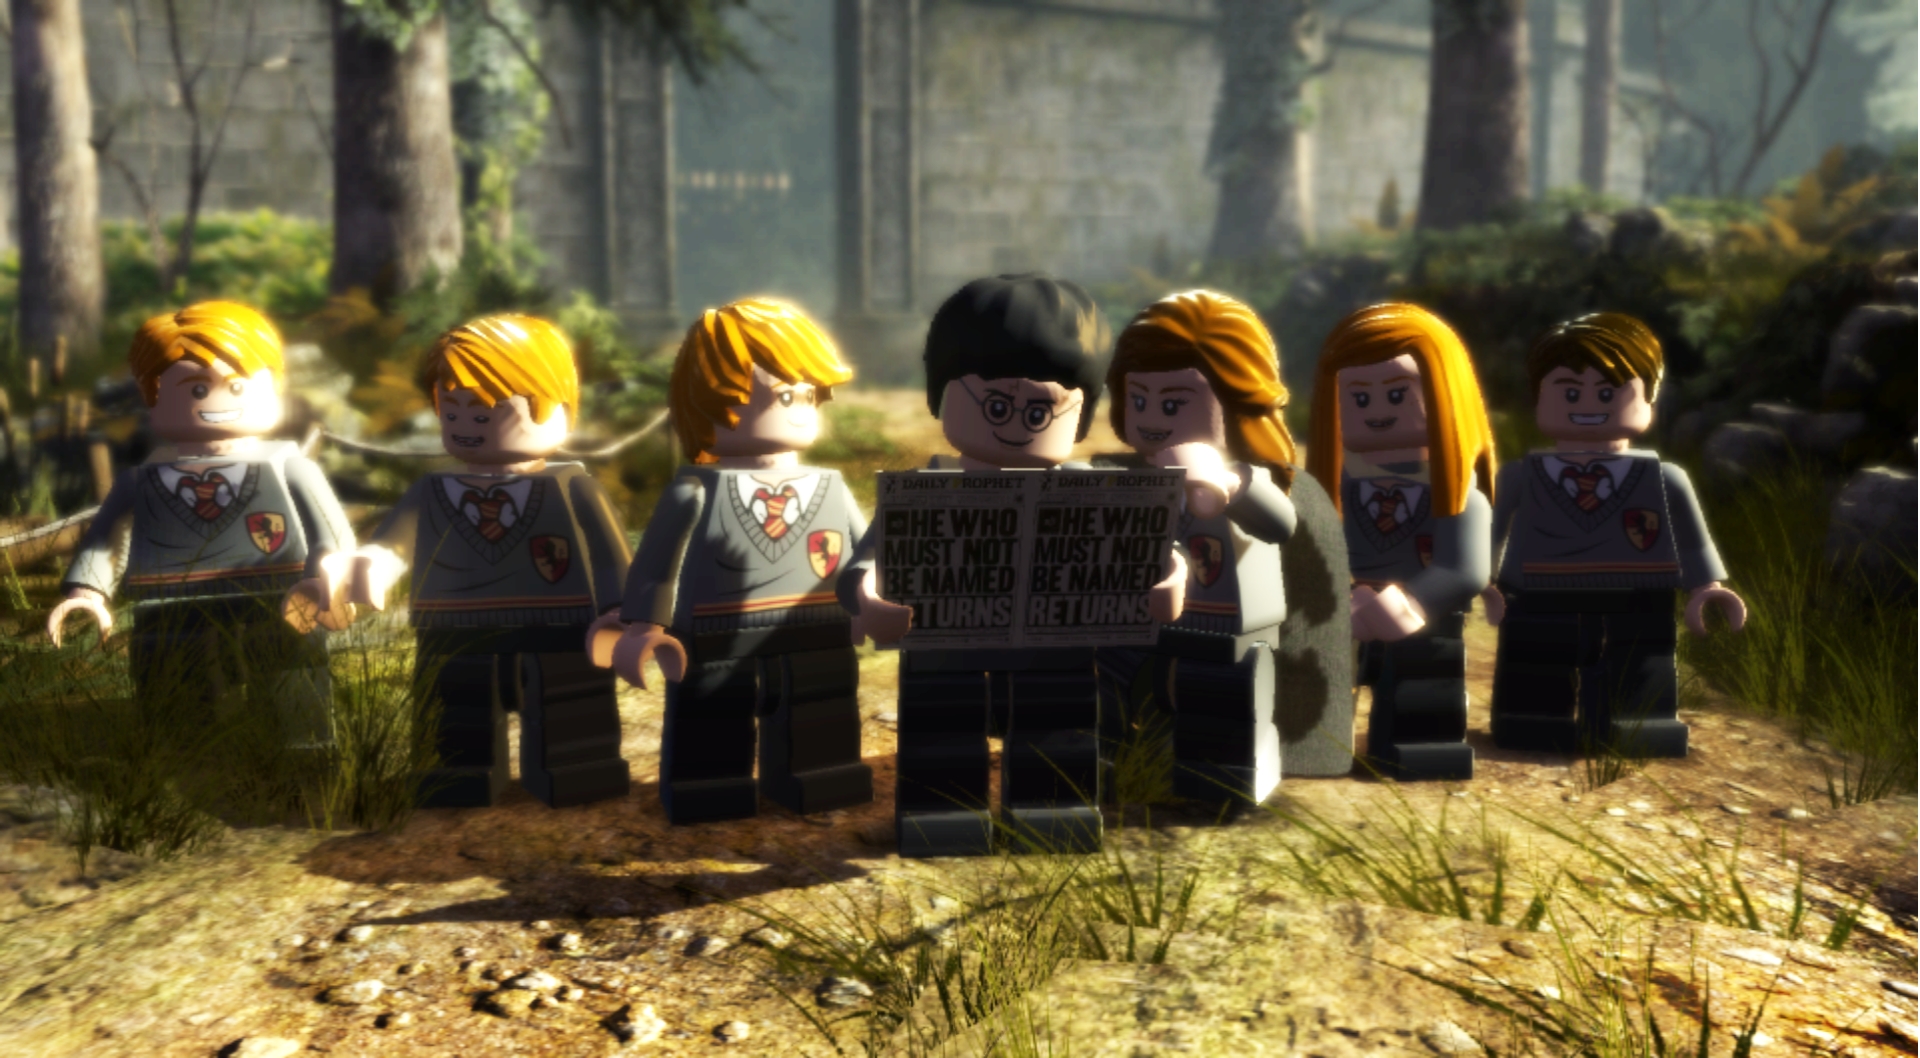 LEGO Harry Potter: Years 5-7 Review (3DS)